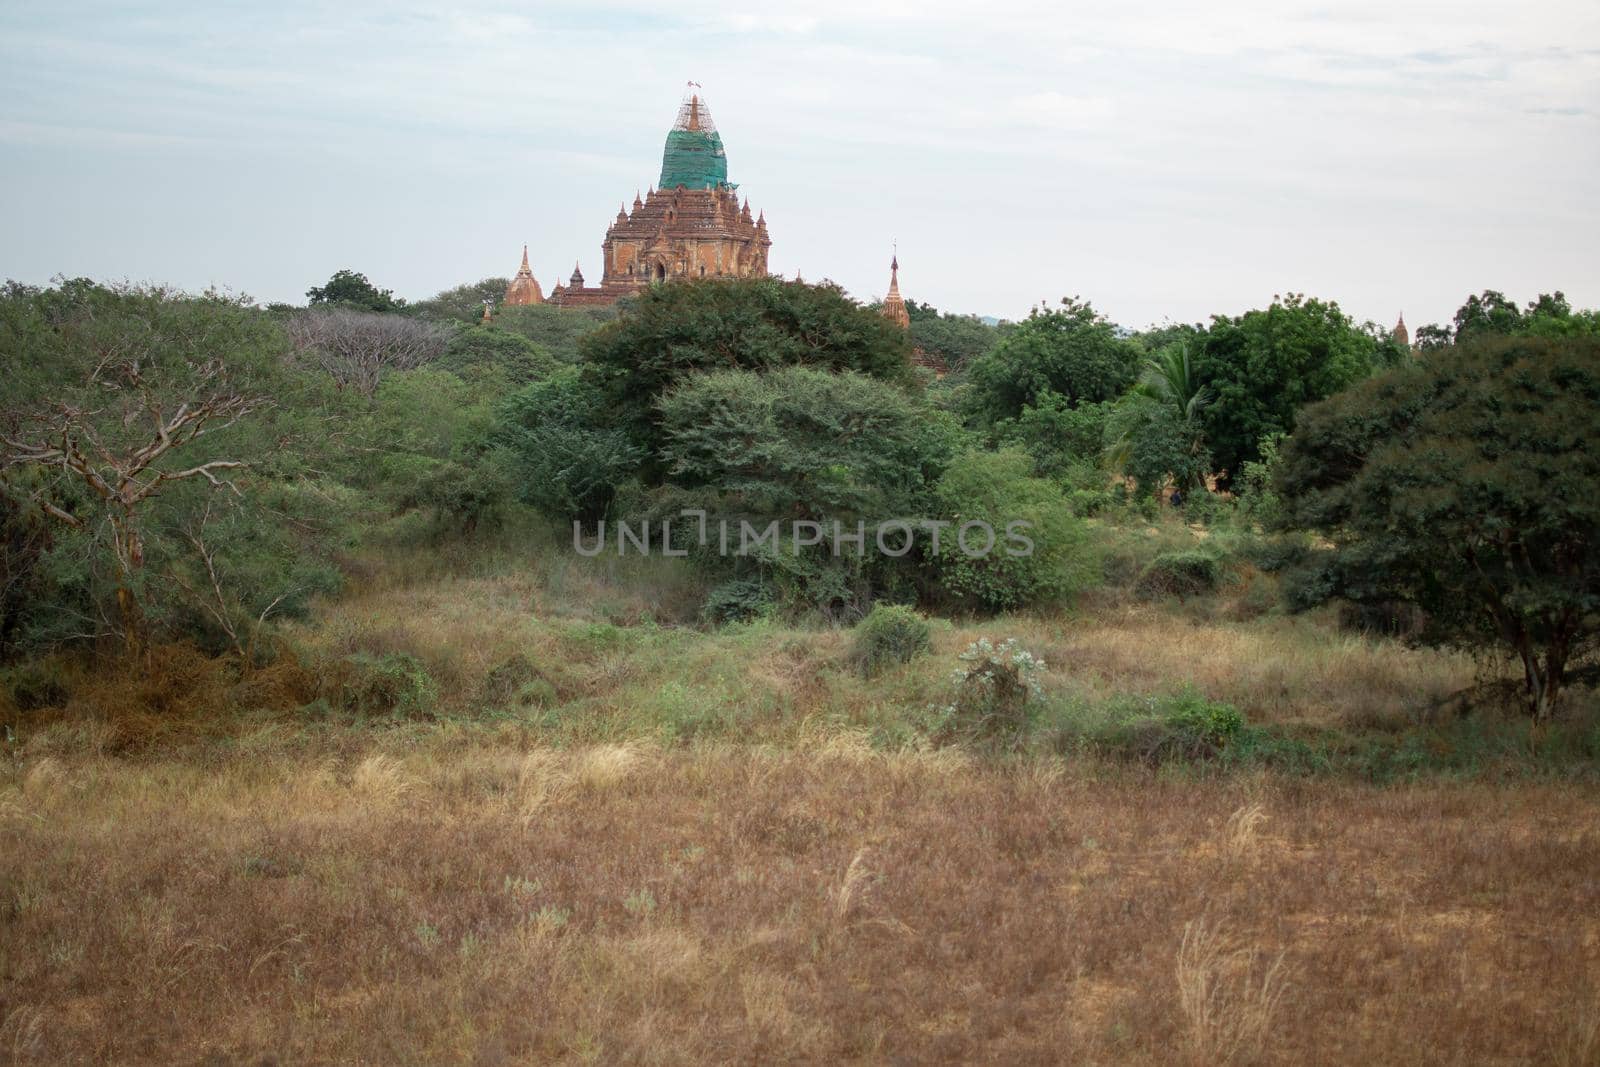 BAGAN, NYAUNG-U, MYANMAR - 2 JANUARY 2020: A historical temple peaking up from the forest and dry fields